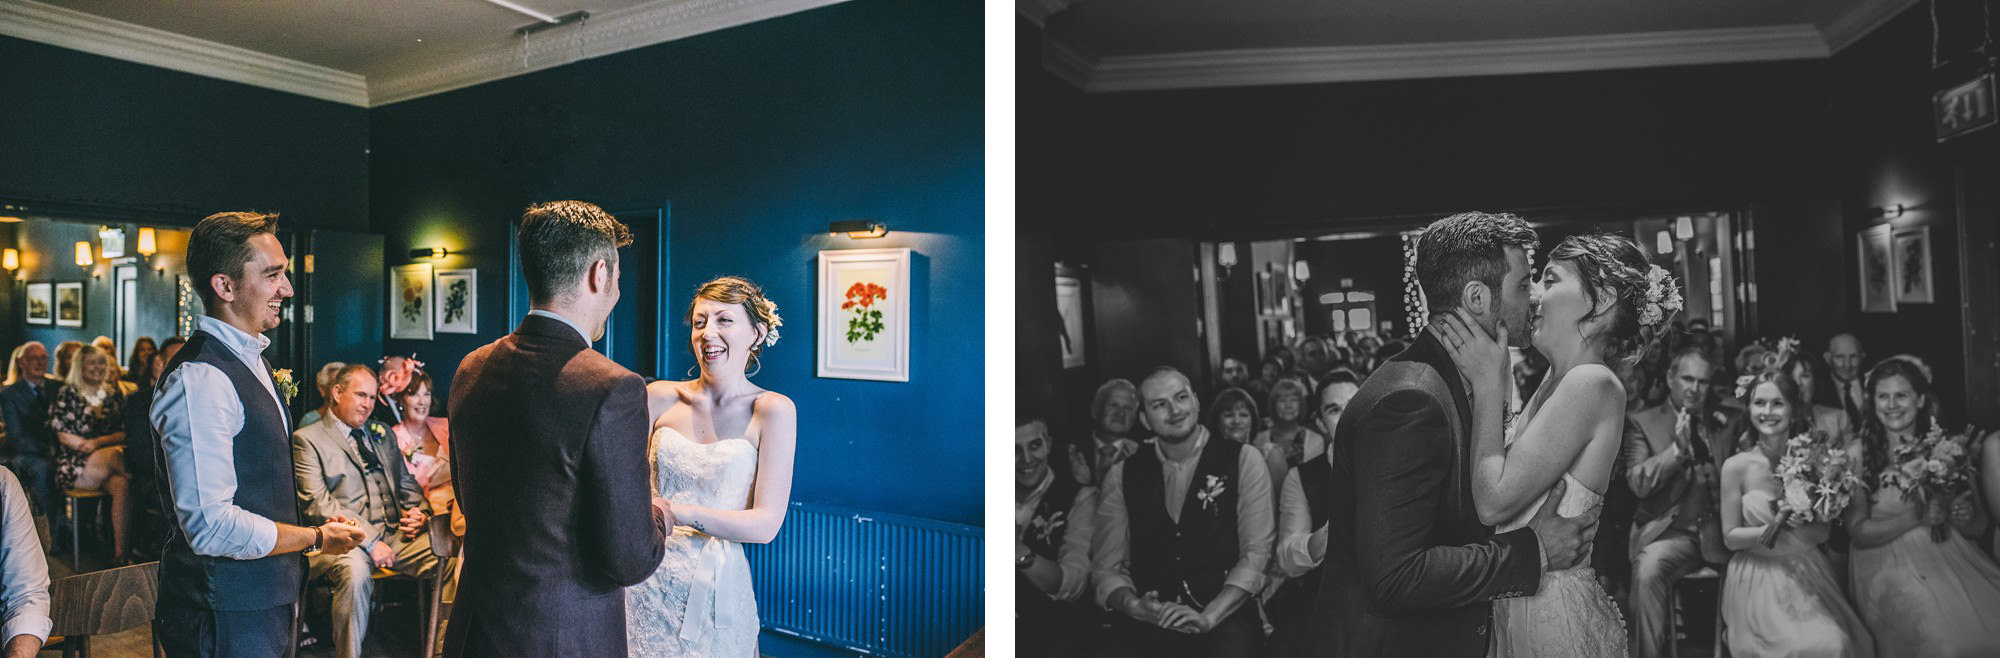 the-georgian-townhouse-norwich-wedding-by-james-powell-photography-017